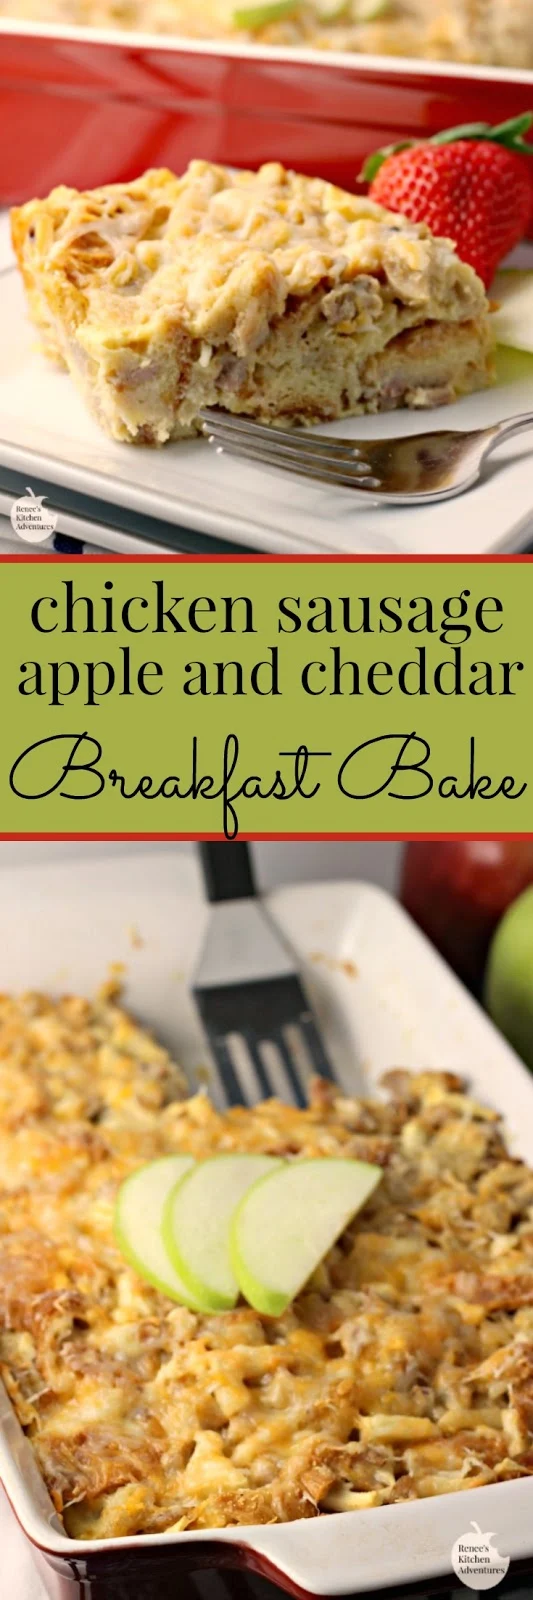 Chicken Sausage, Apple and Cheddar Breakfast Bake | by Renee's Kitchen Adventures - easy recipe for breakfast or brunch with sausage, apples, and cheese.  Sweet and savory. Can be a make-ahead casserole. #SundaySupper